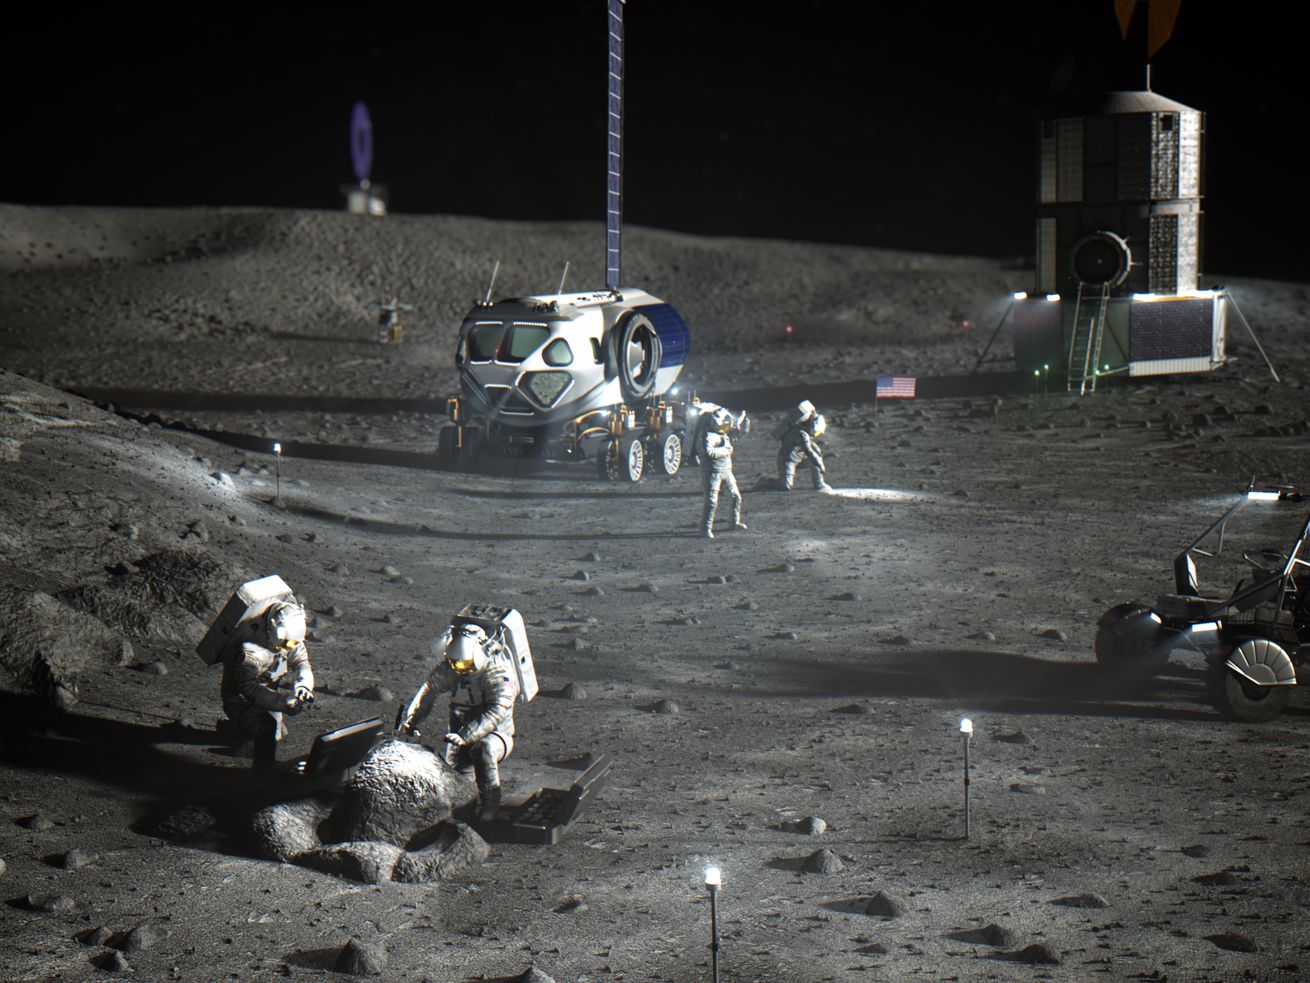 A mock-up of what a moon base camp might look like on the moon, including astronauts in spacesuits and a wheeled rover.